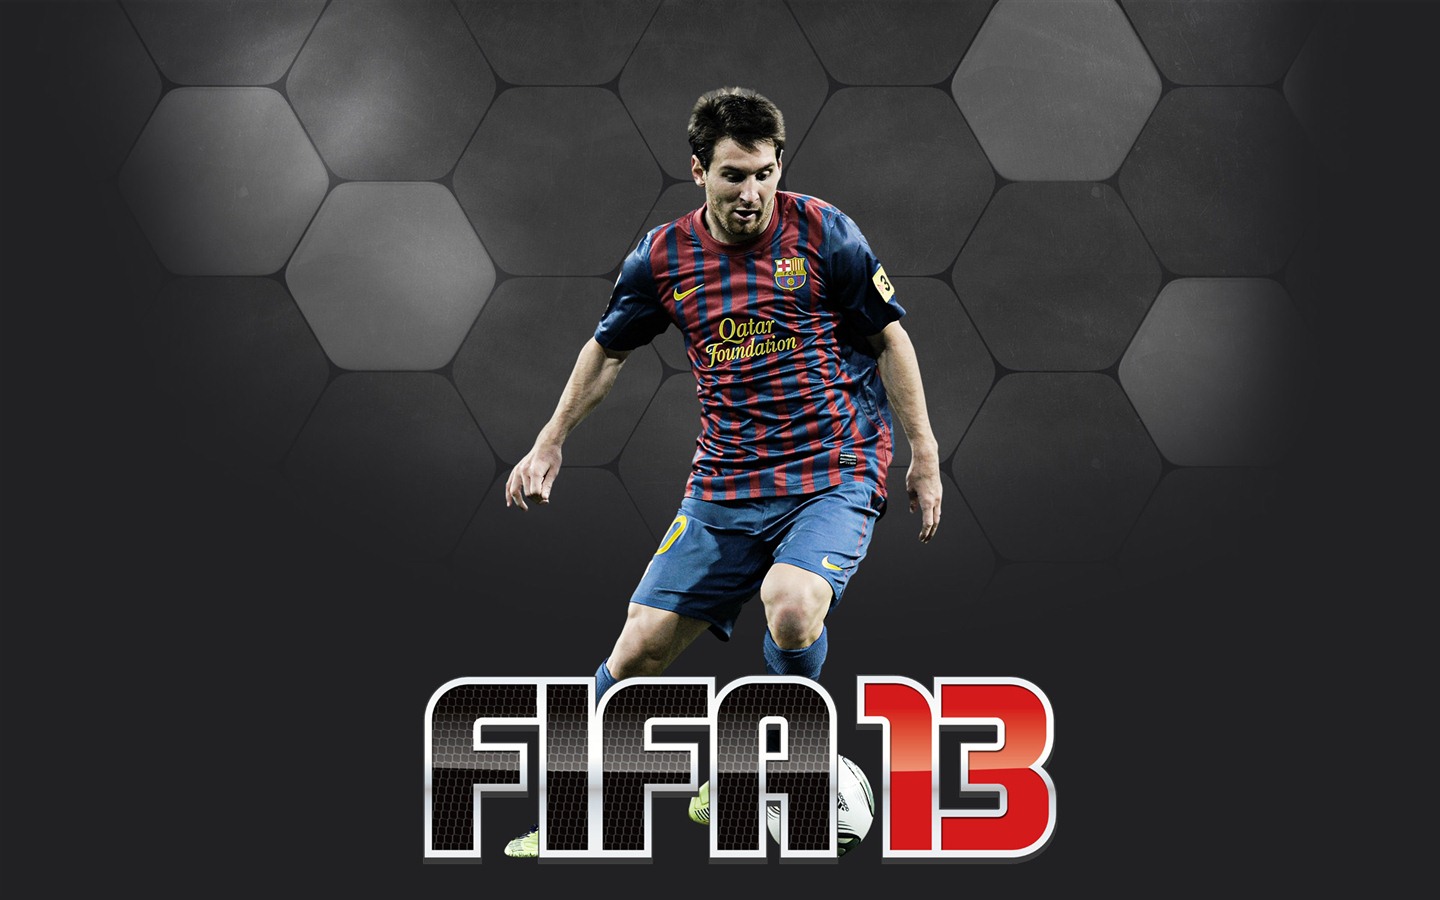 FIFA 13 game HD wallpapers #6 - 1440x900